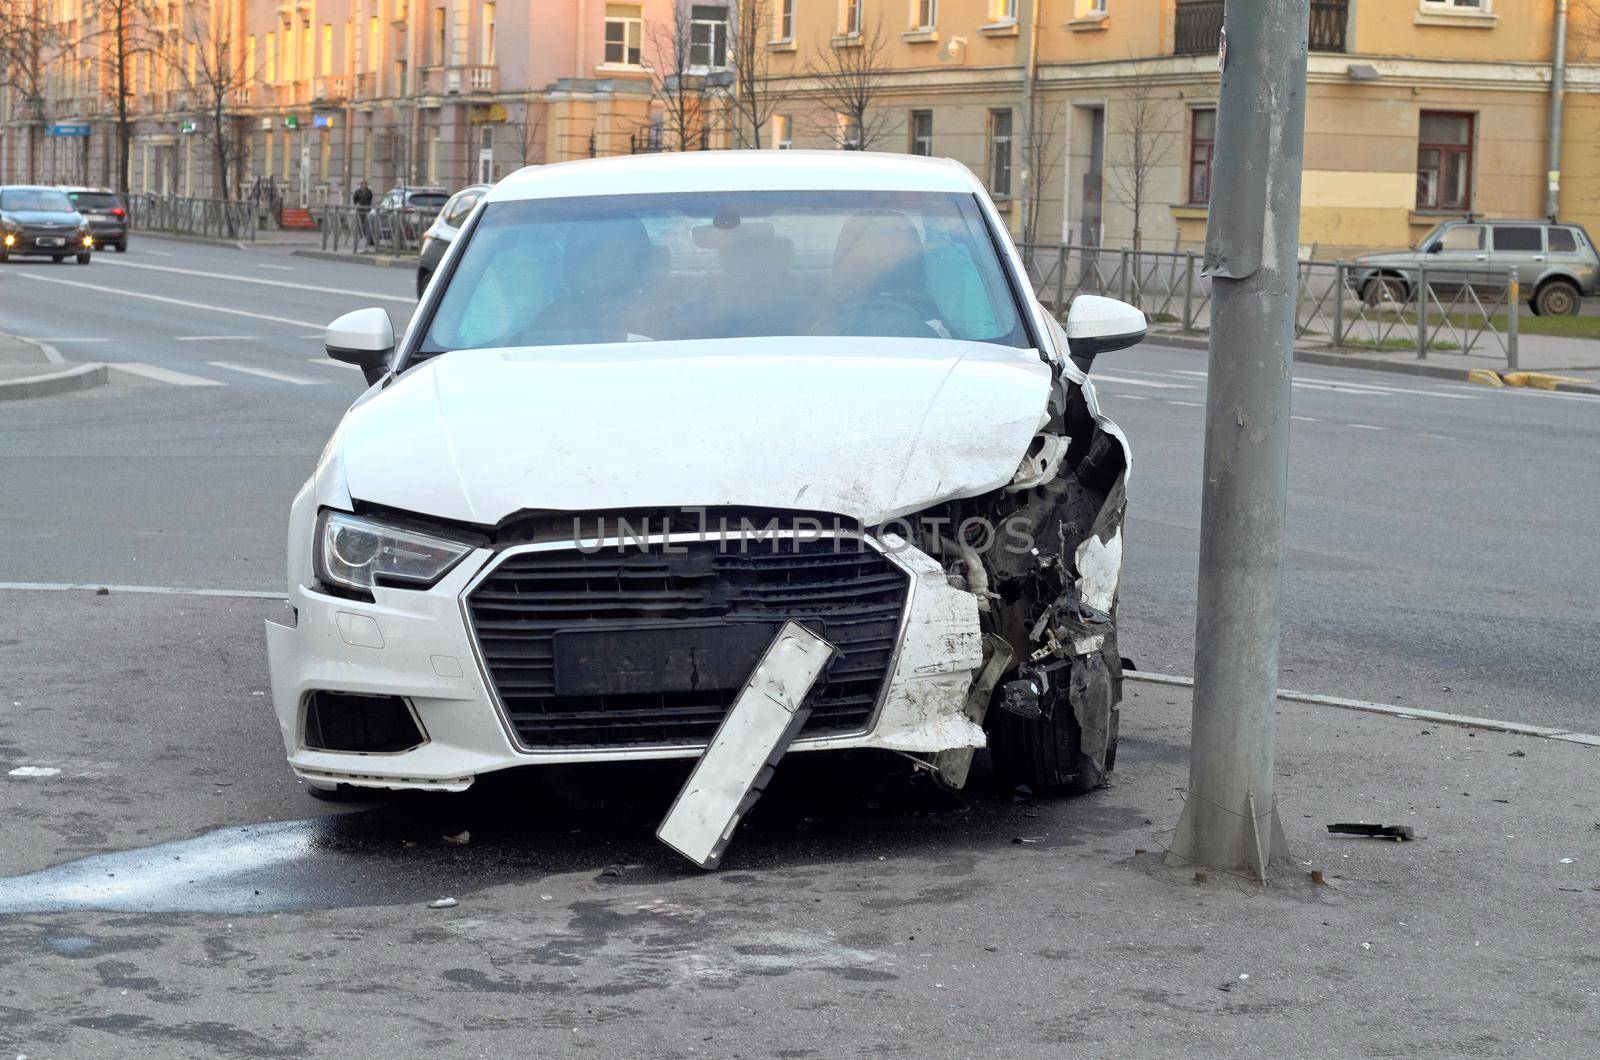 The front part of the damaged car as a result of the accident at the pole.Car accident insurance by andre_dechapelle